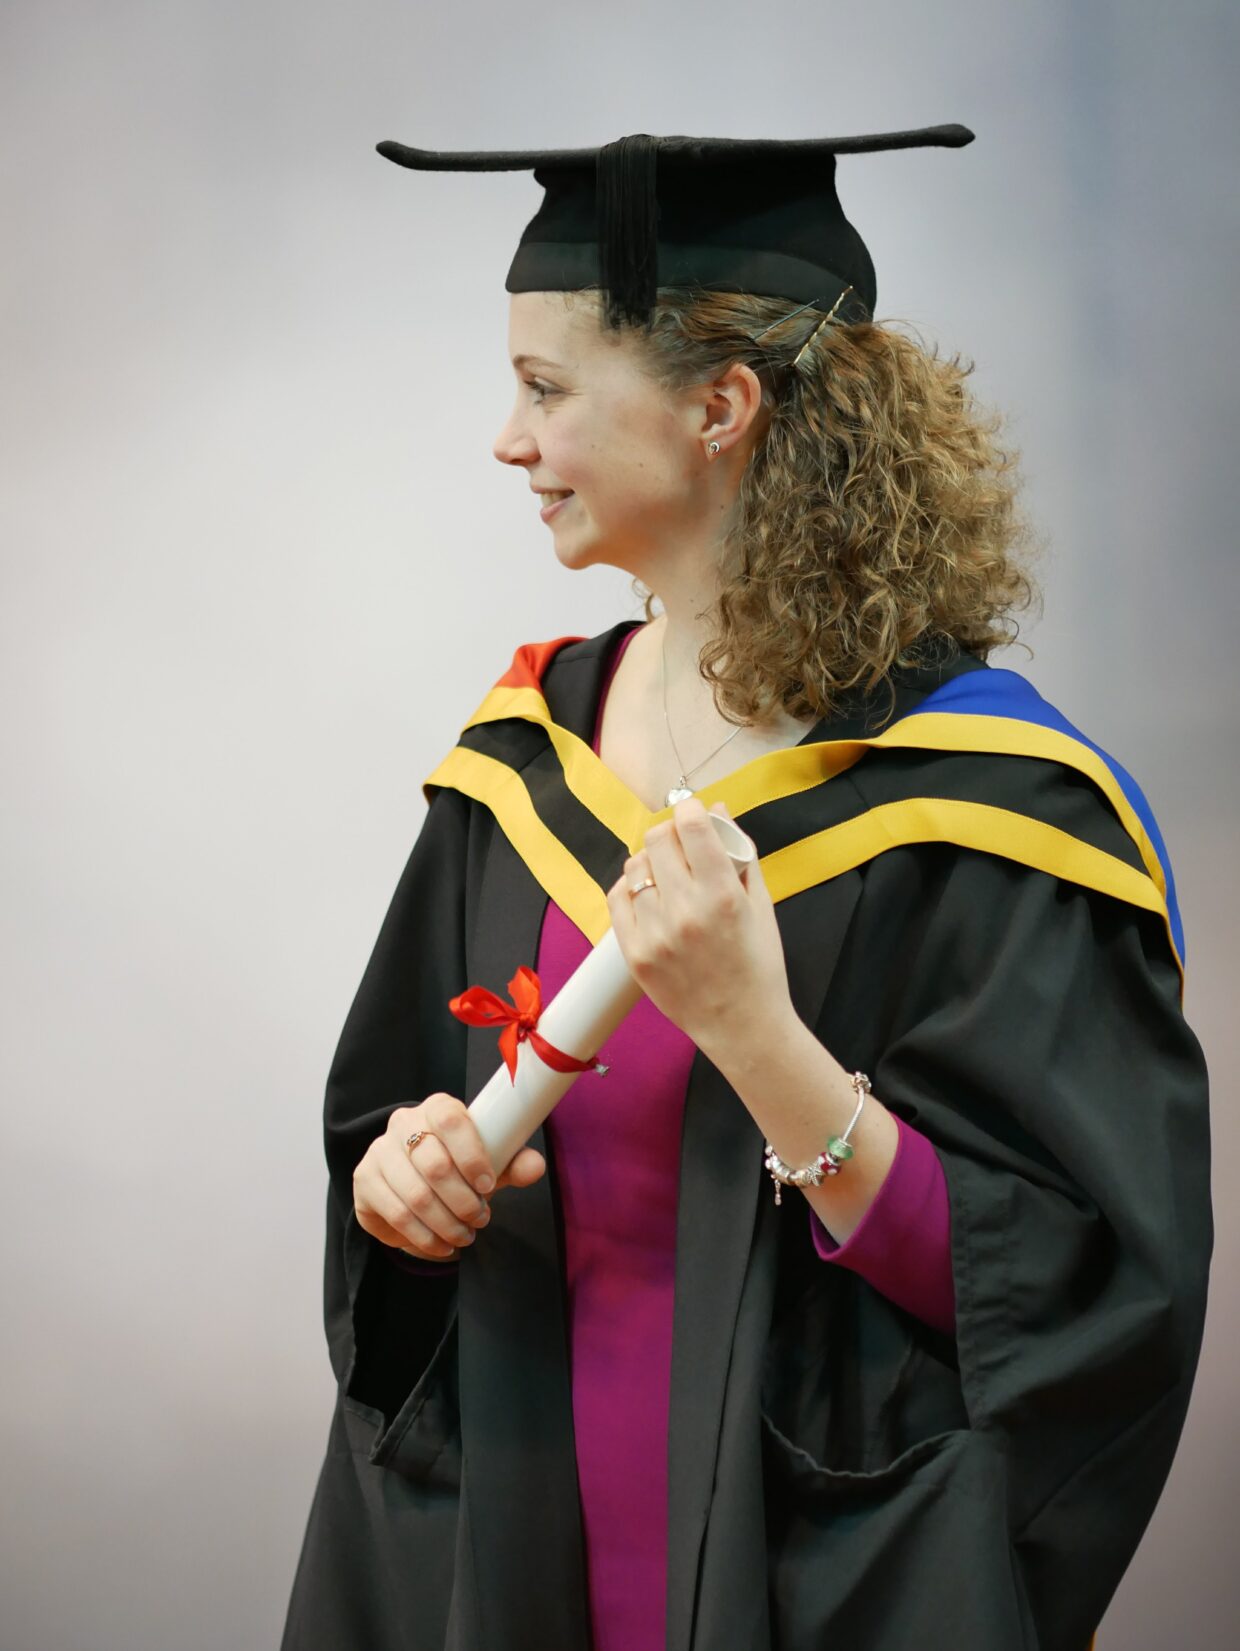 Chloe is stood against a photography background for her Masters graduation photo. Chloe is wearing a graduation cap and gown. Chloe is also wearing a pink dress and holding a scroll.